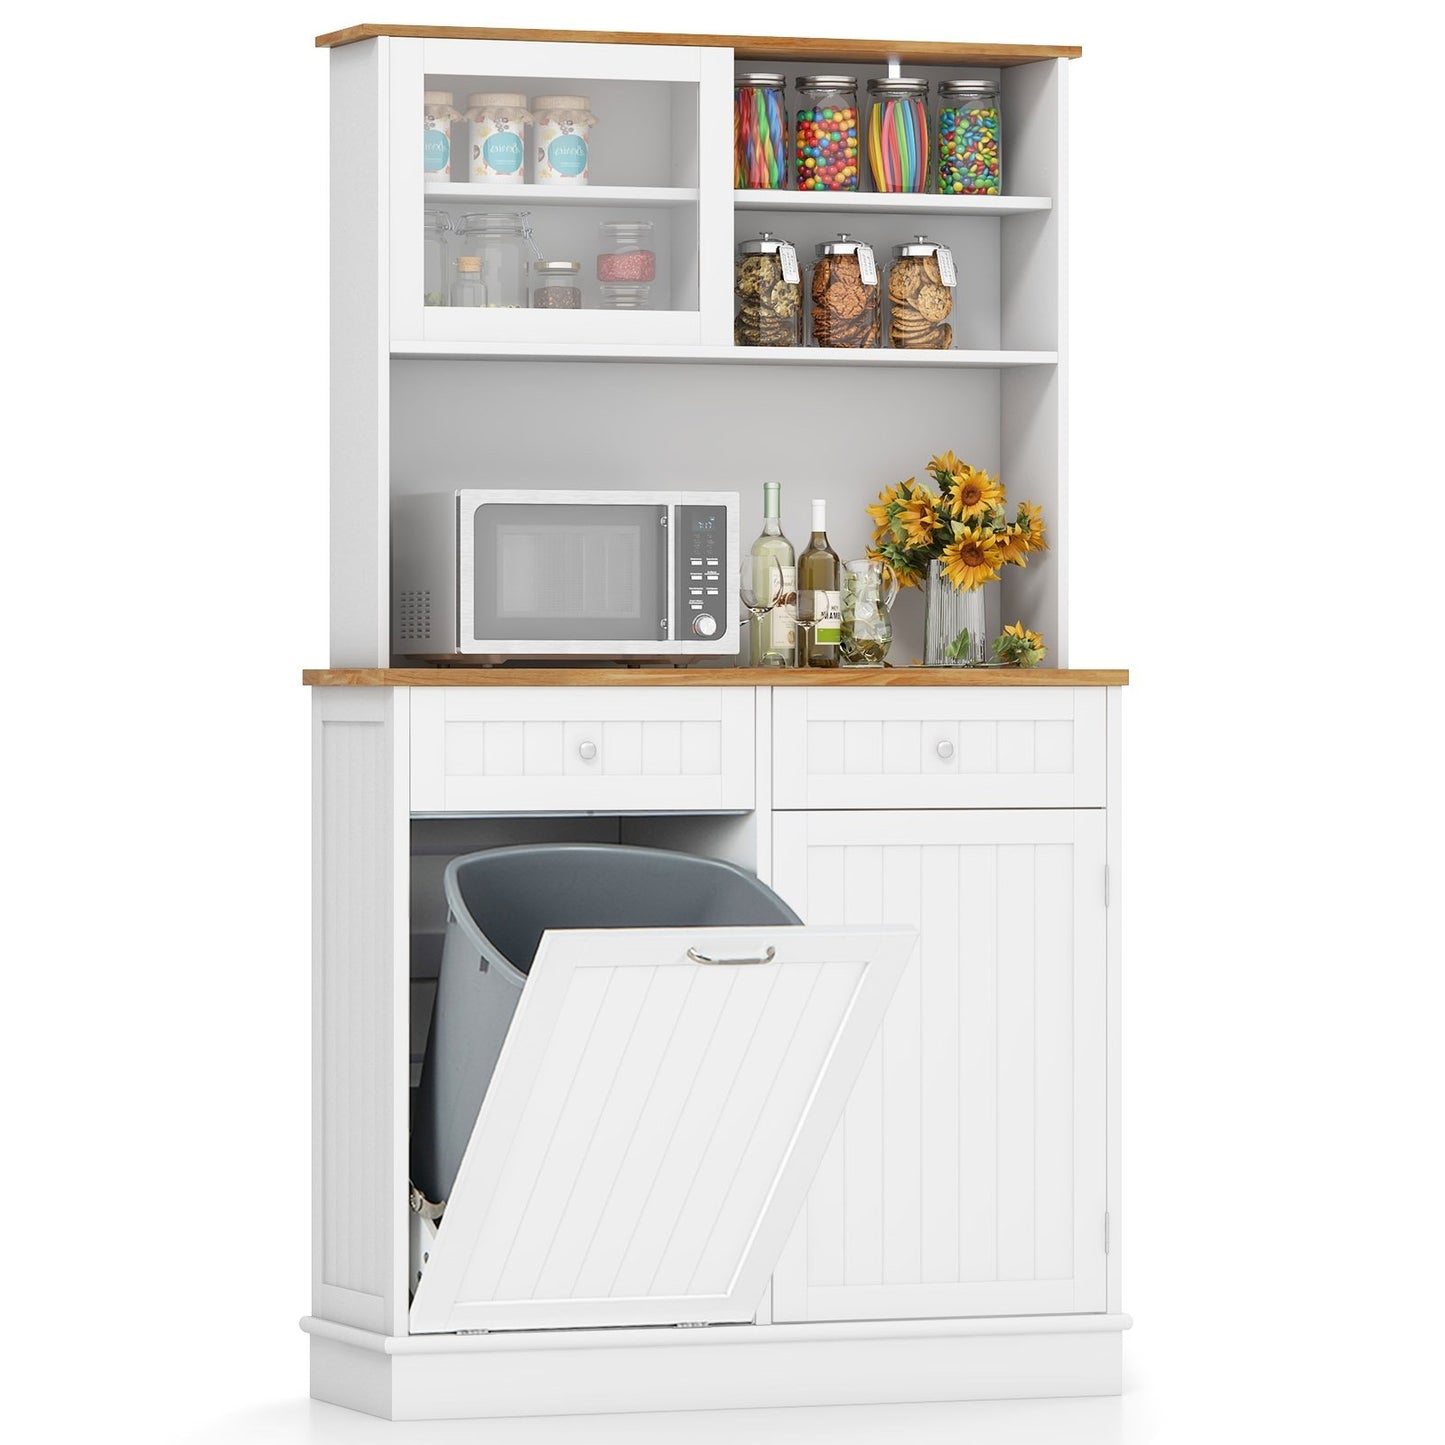 Double Tilt Out Trash Cabinet with Hutch and Rubber Wood Countertop, White